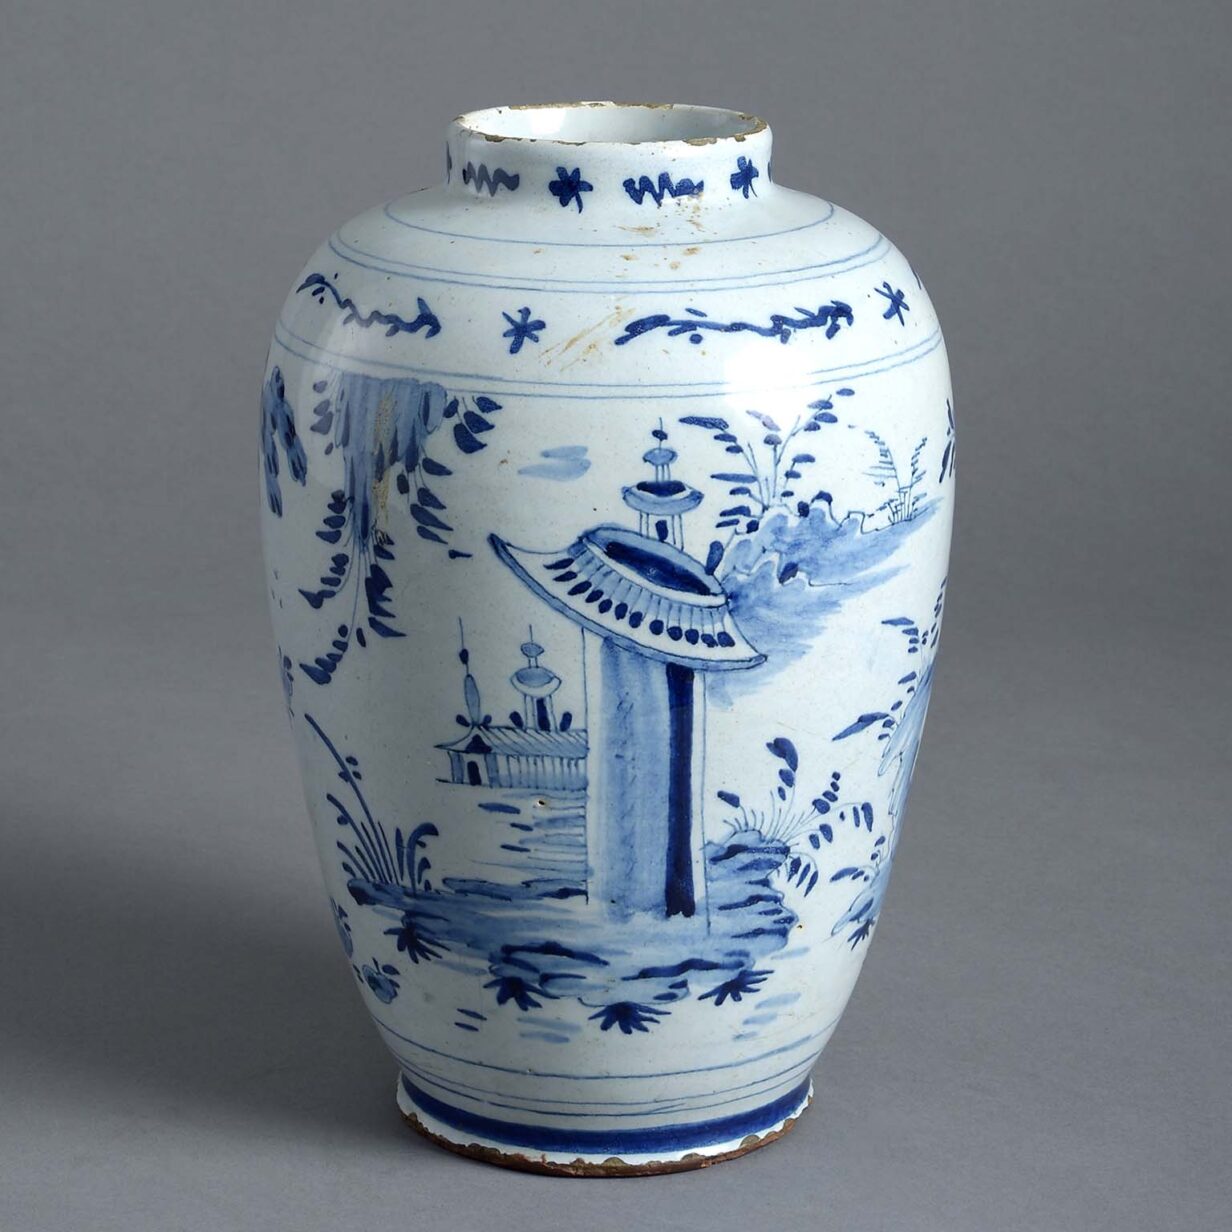 Late 18th century blue and white glazed delft pottery vase